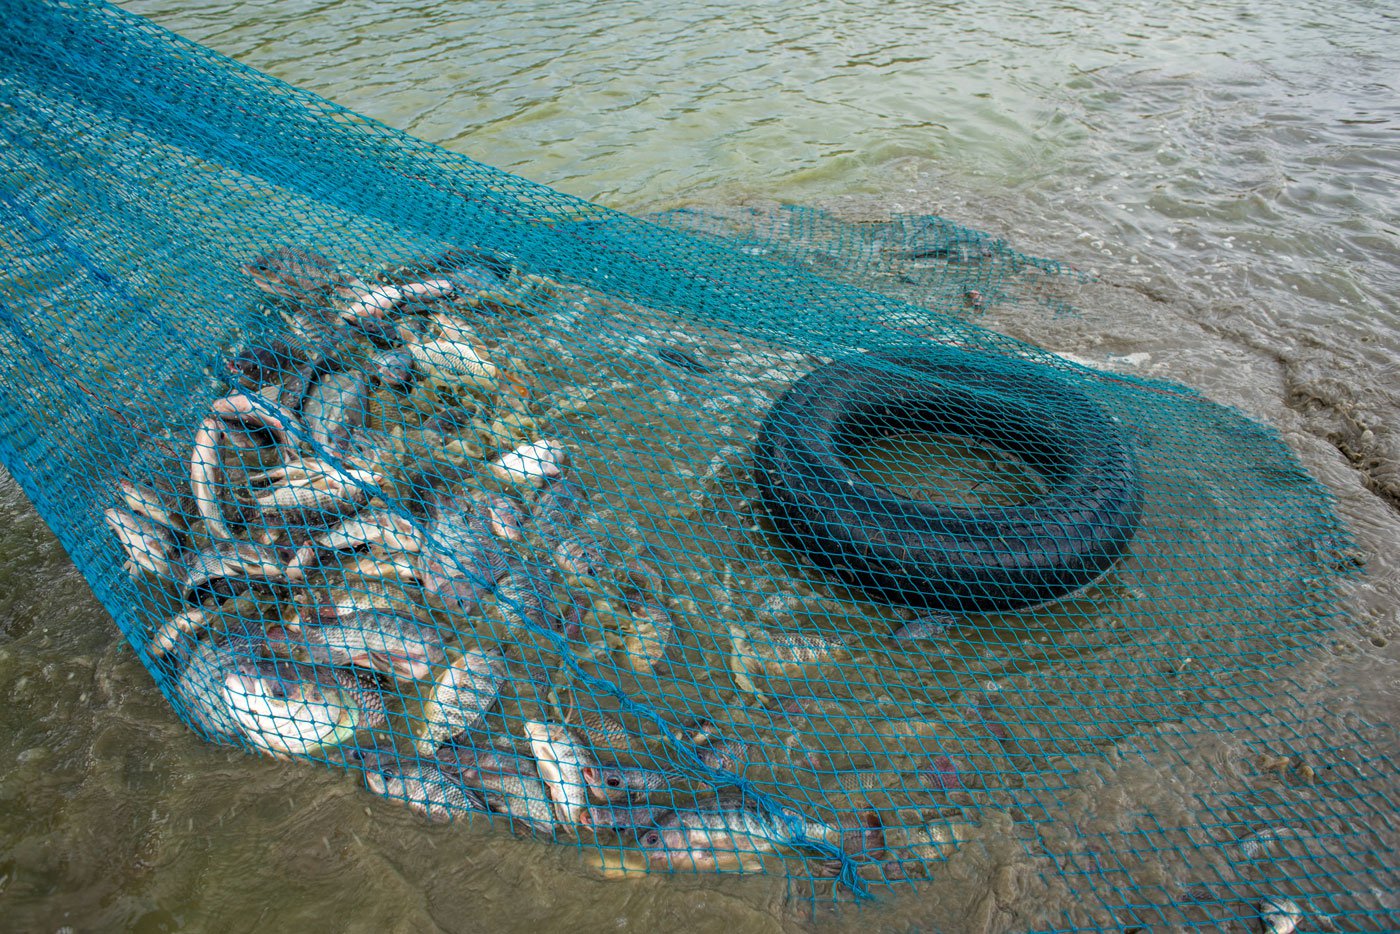 Fish caught during the day are stored in a temporary structure called ' aapa' to keep the catch fresh until evening when it will be taken and sold at the market